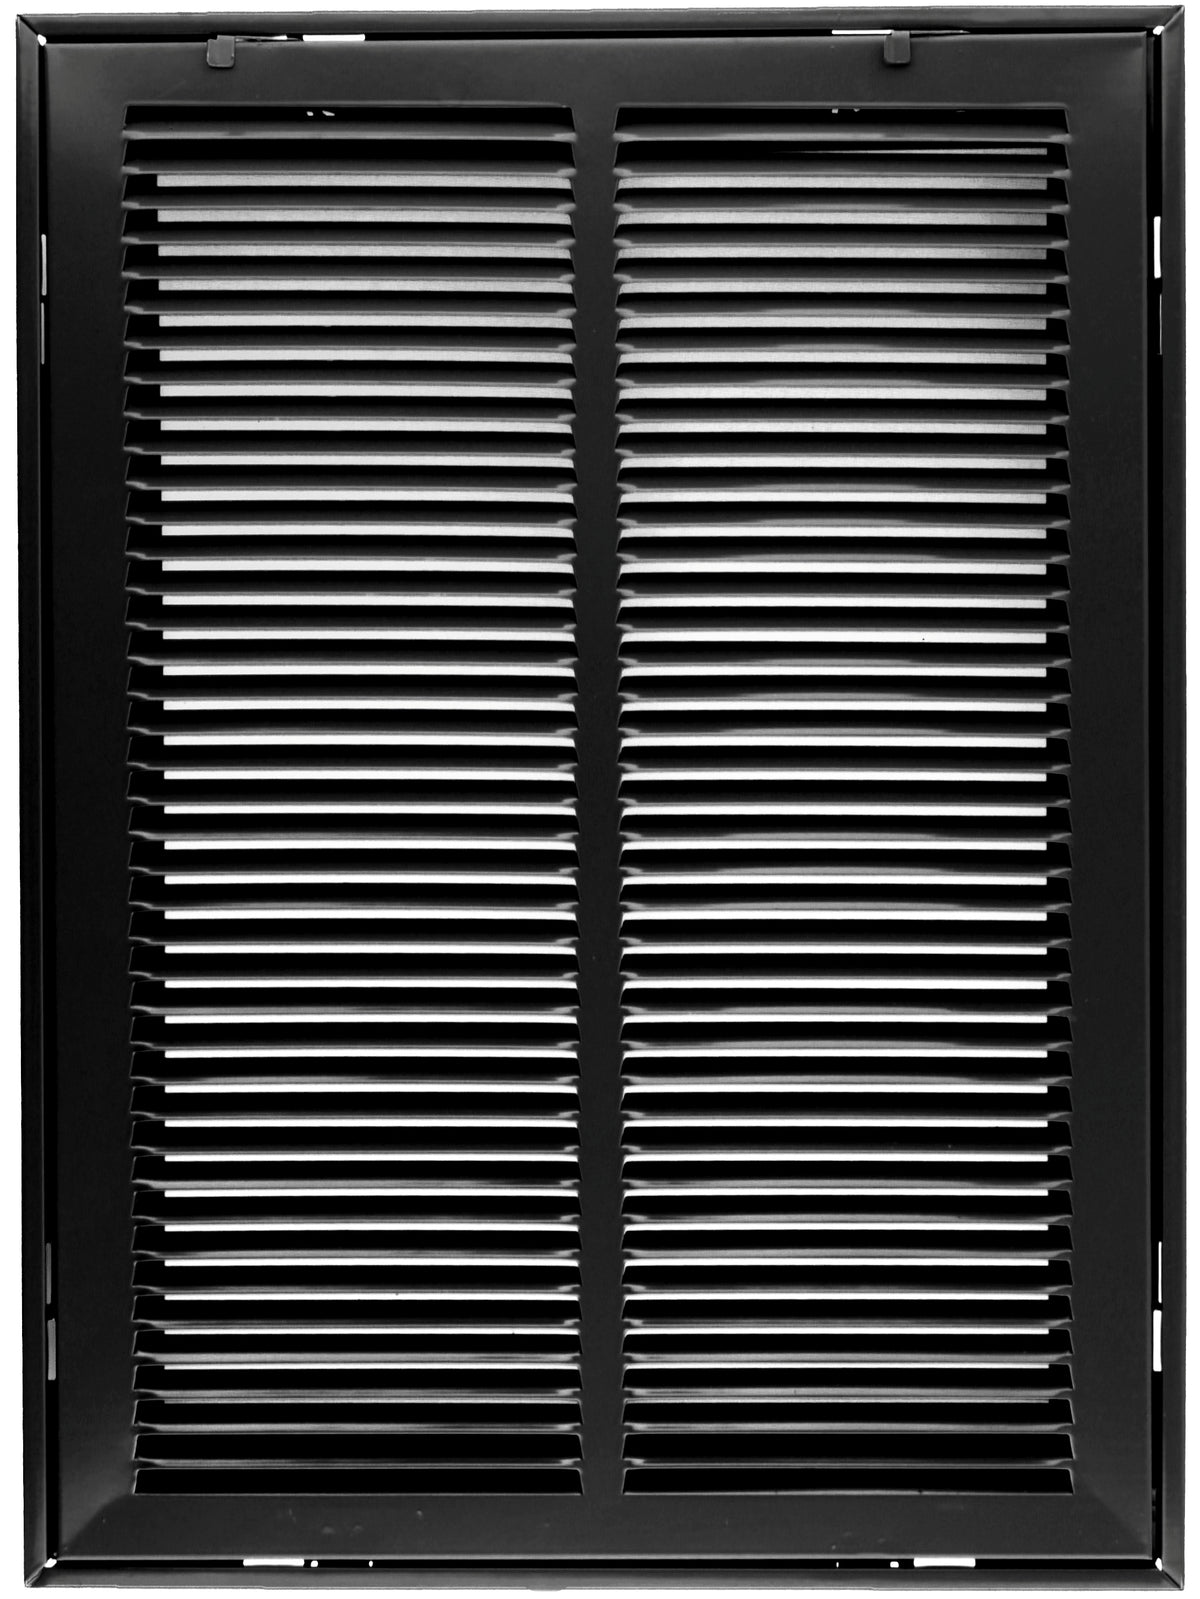 12&quot; X 24&quot; Steel Return Air Filter Grille for 1&quot; Filter - Removable Frame - Black - [Outer Dimensions: 14 5/8&quot; X 26 5/8&quot;]